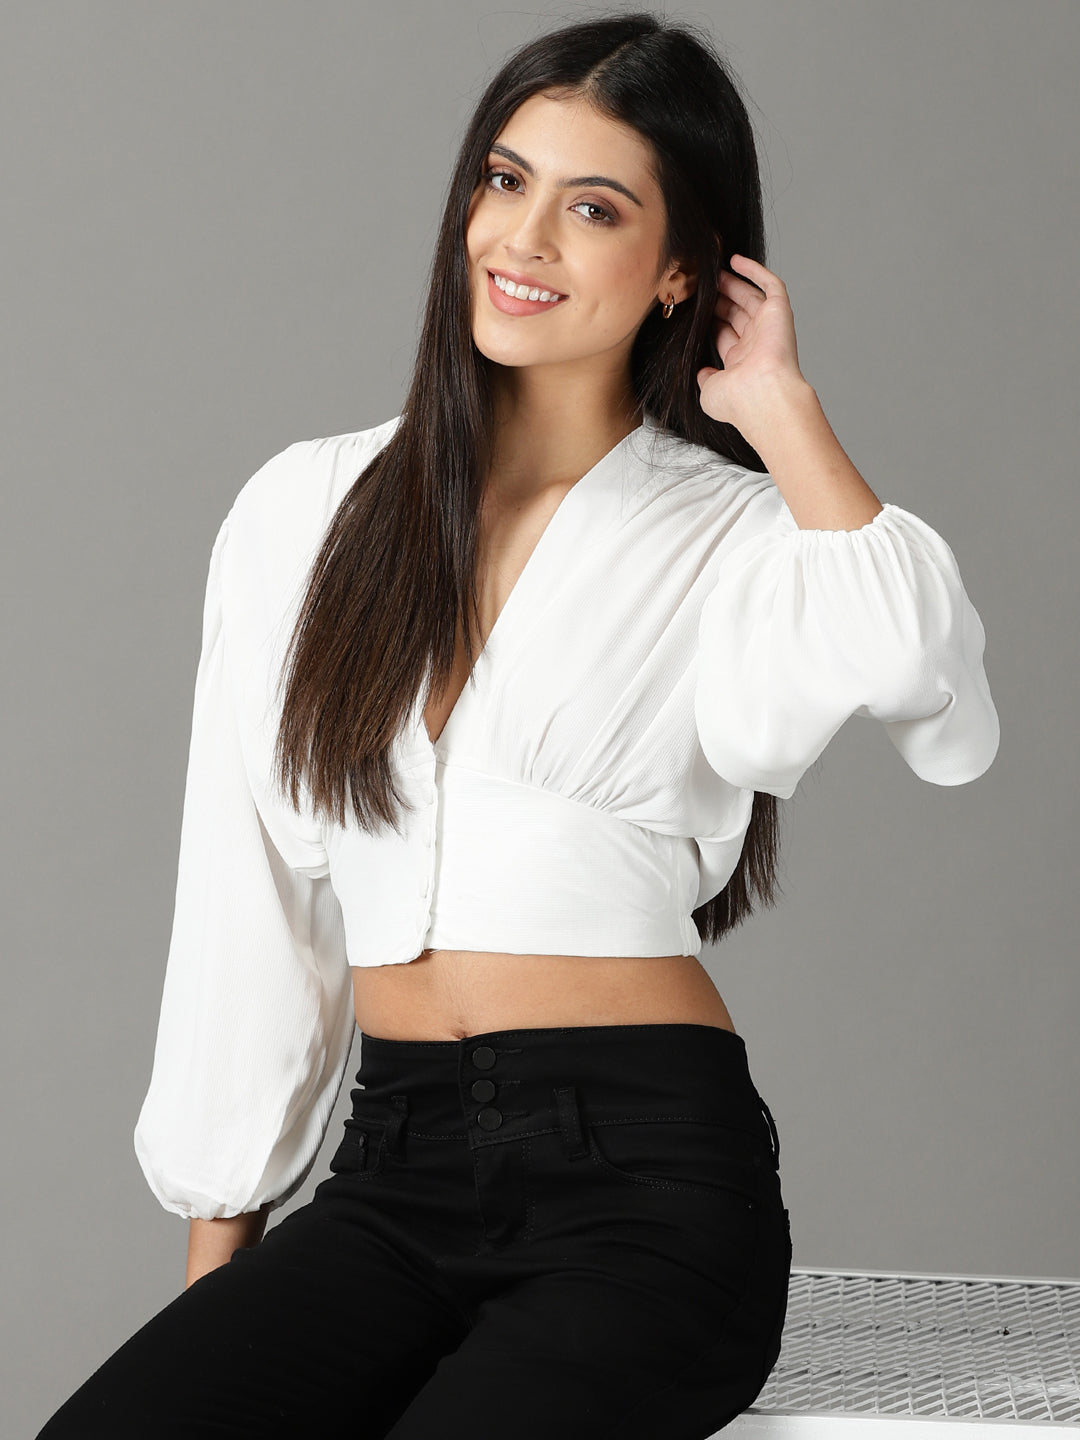 Women's White Solid Cinched Waist Top